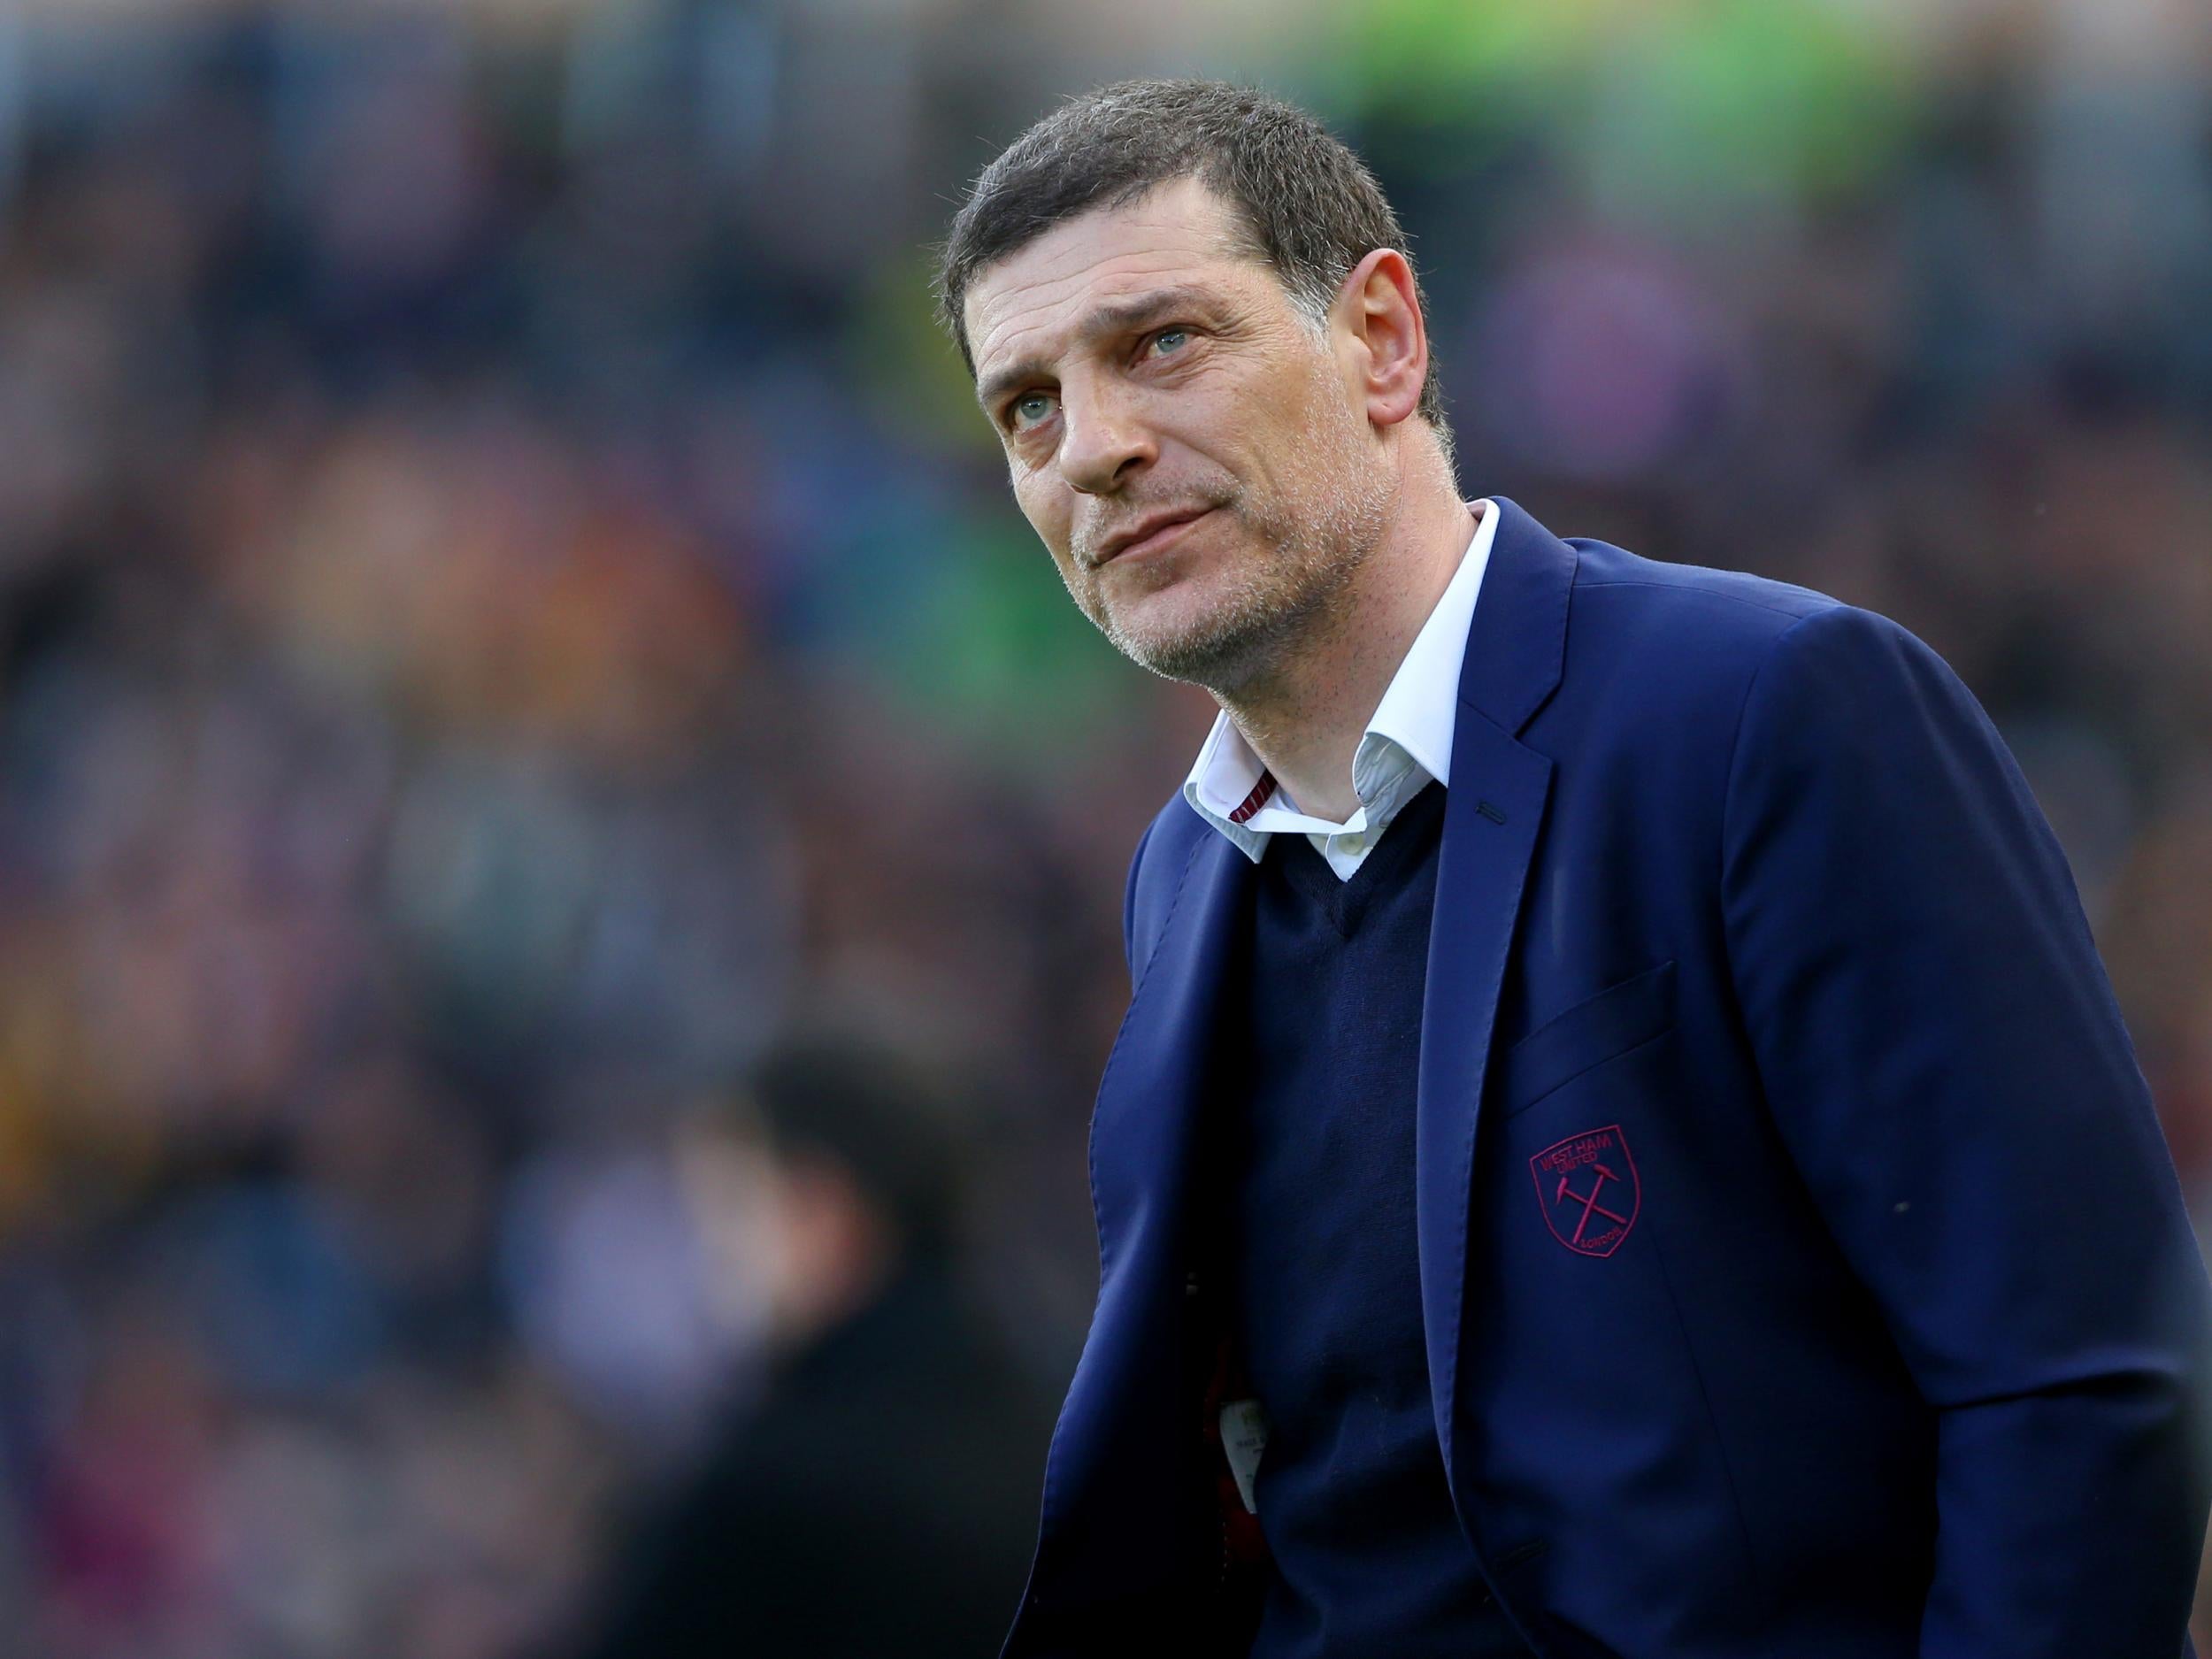 West Ham have insisted they do not want to sack Bilic